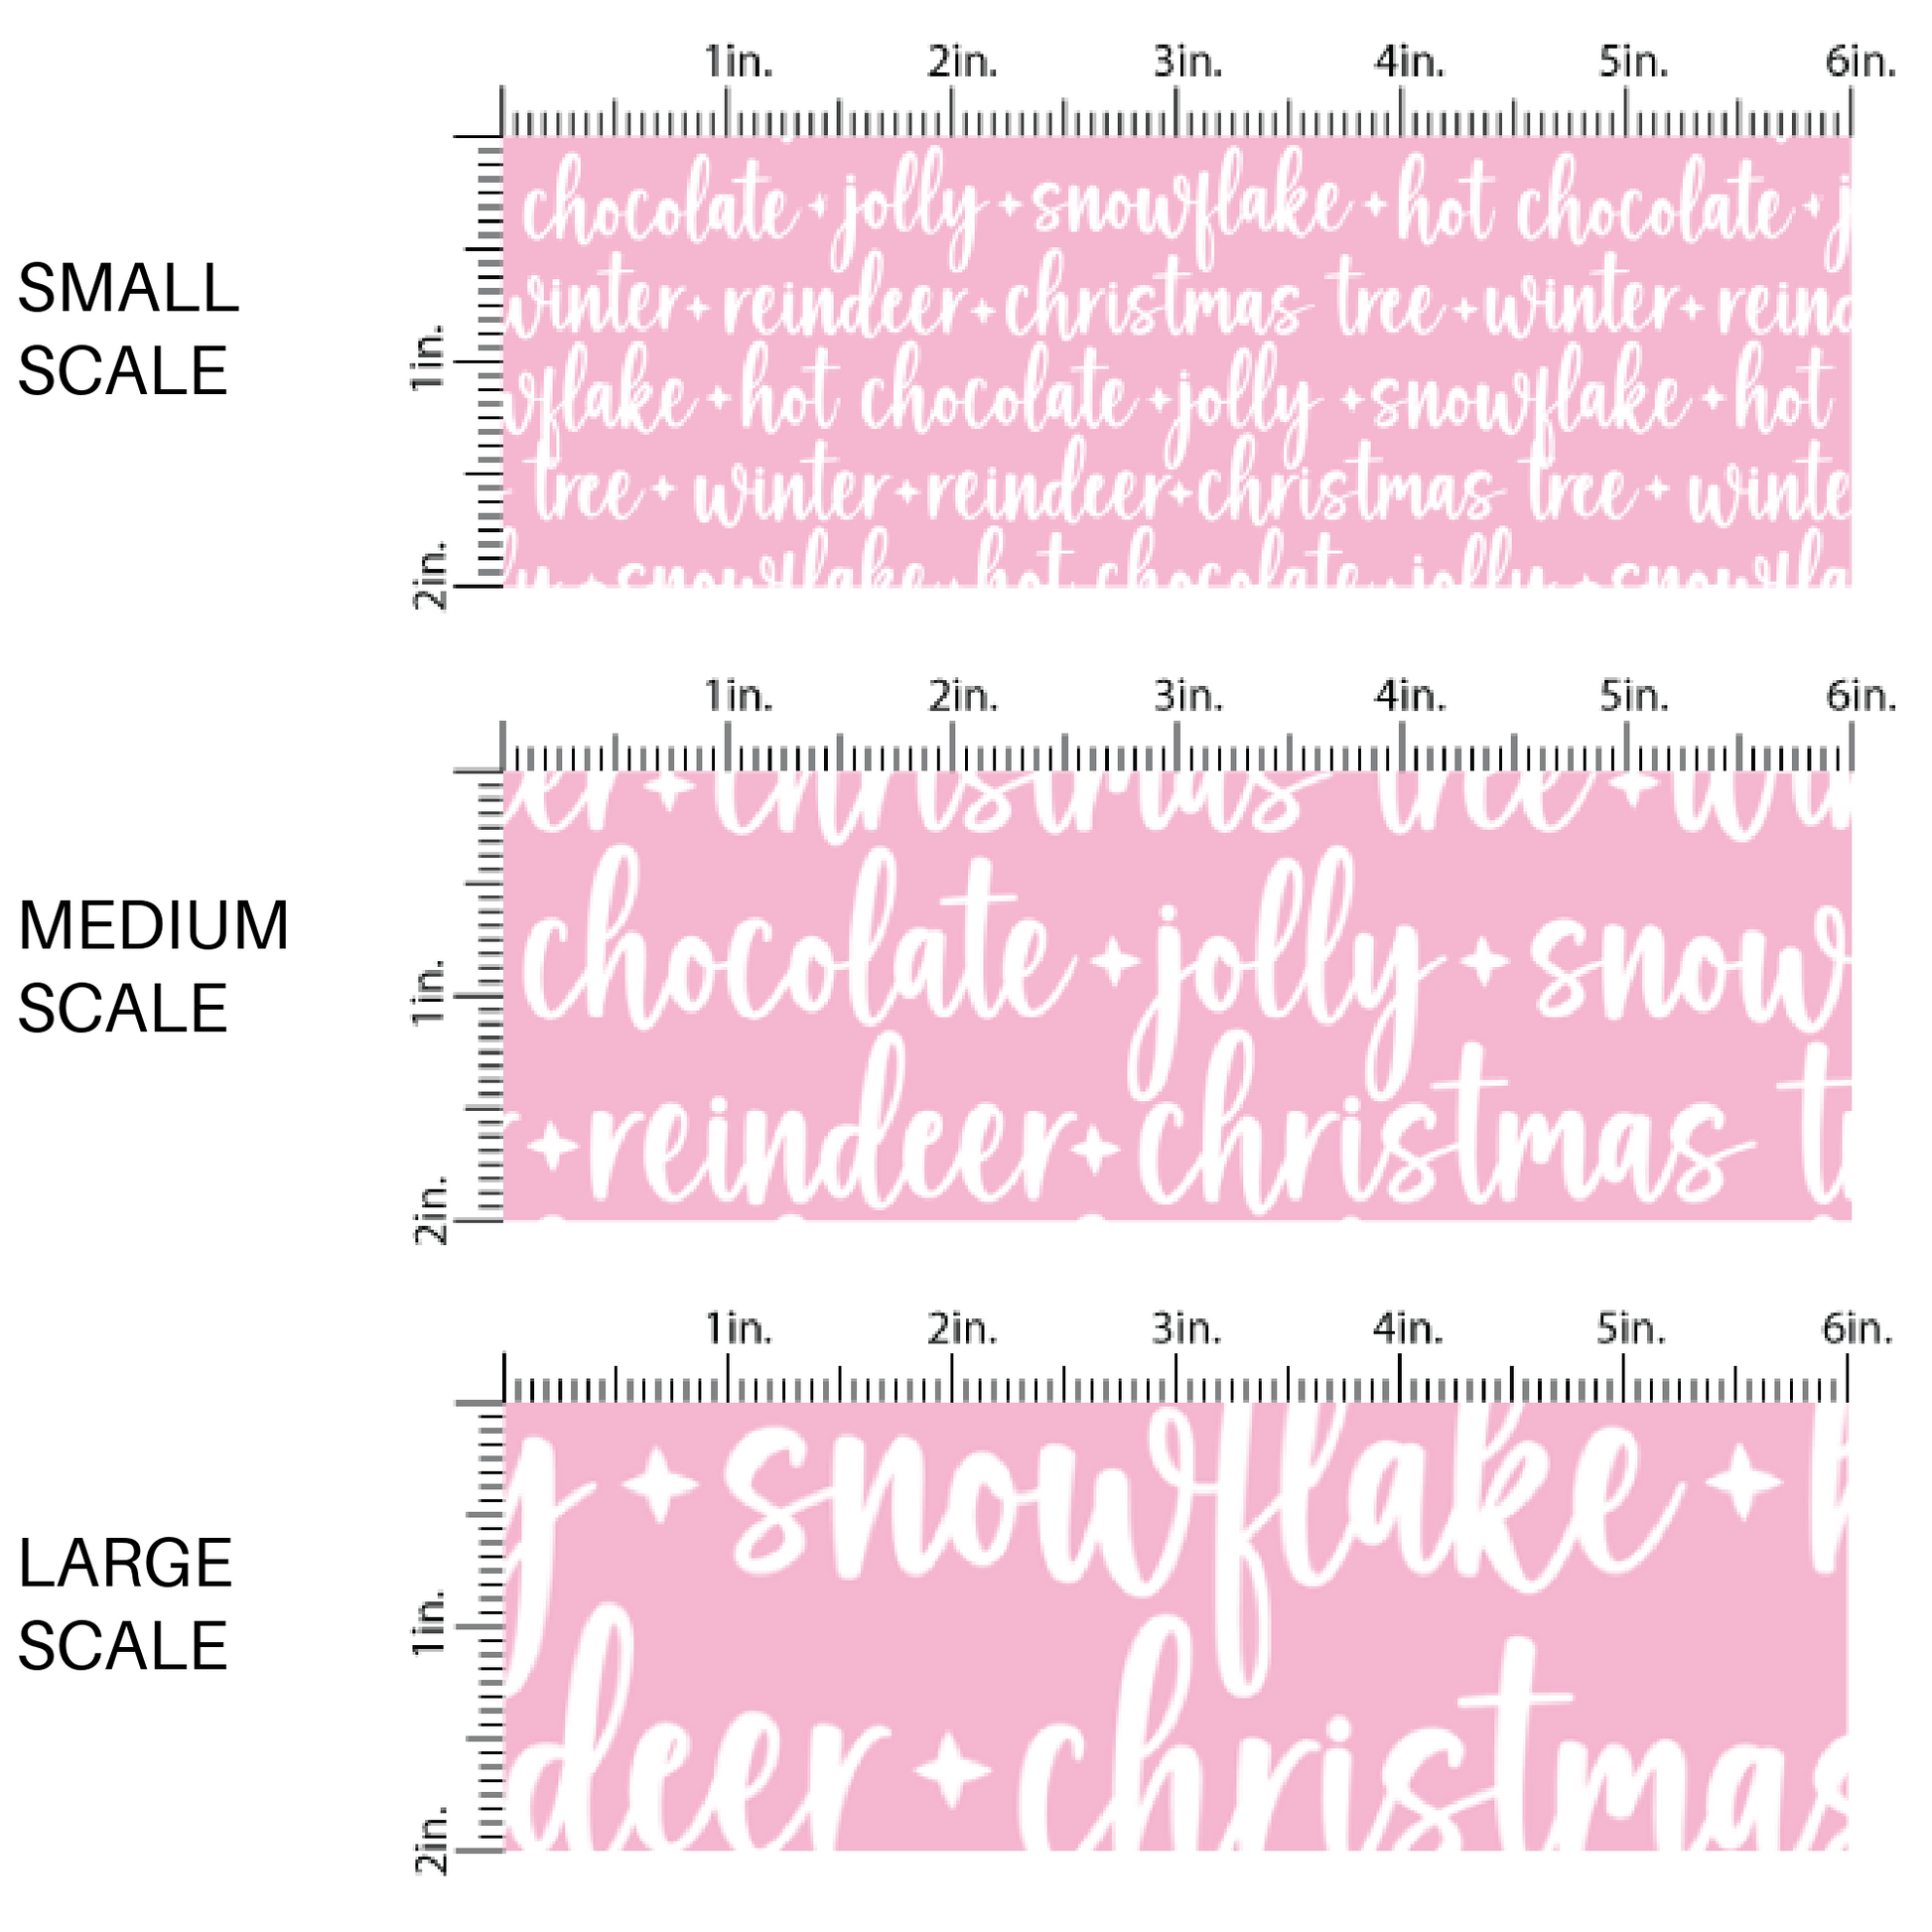 Pink fabric by the yard scaled image guide with cursive font holiday sayings.